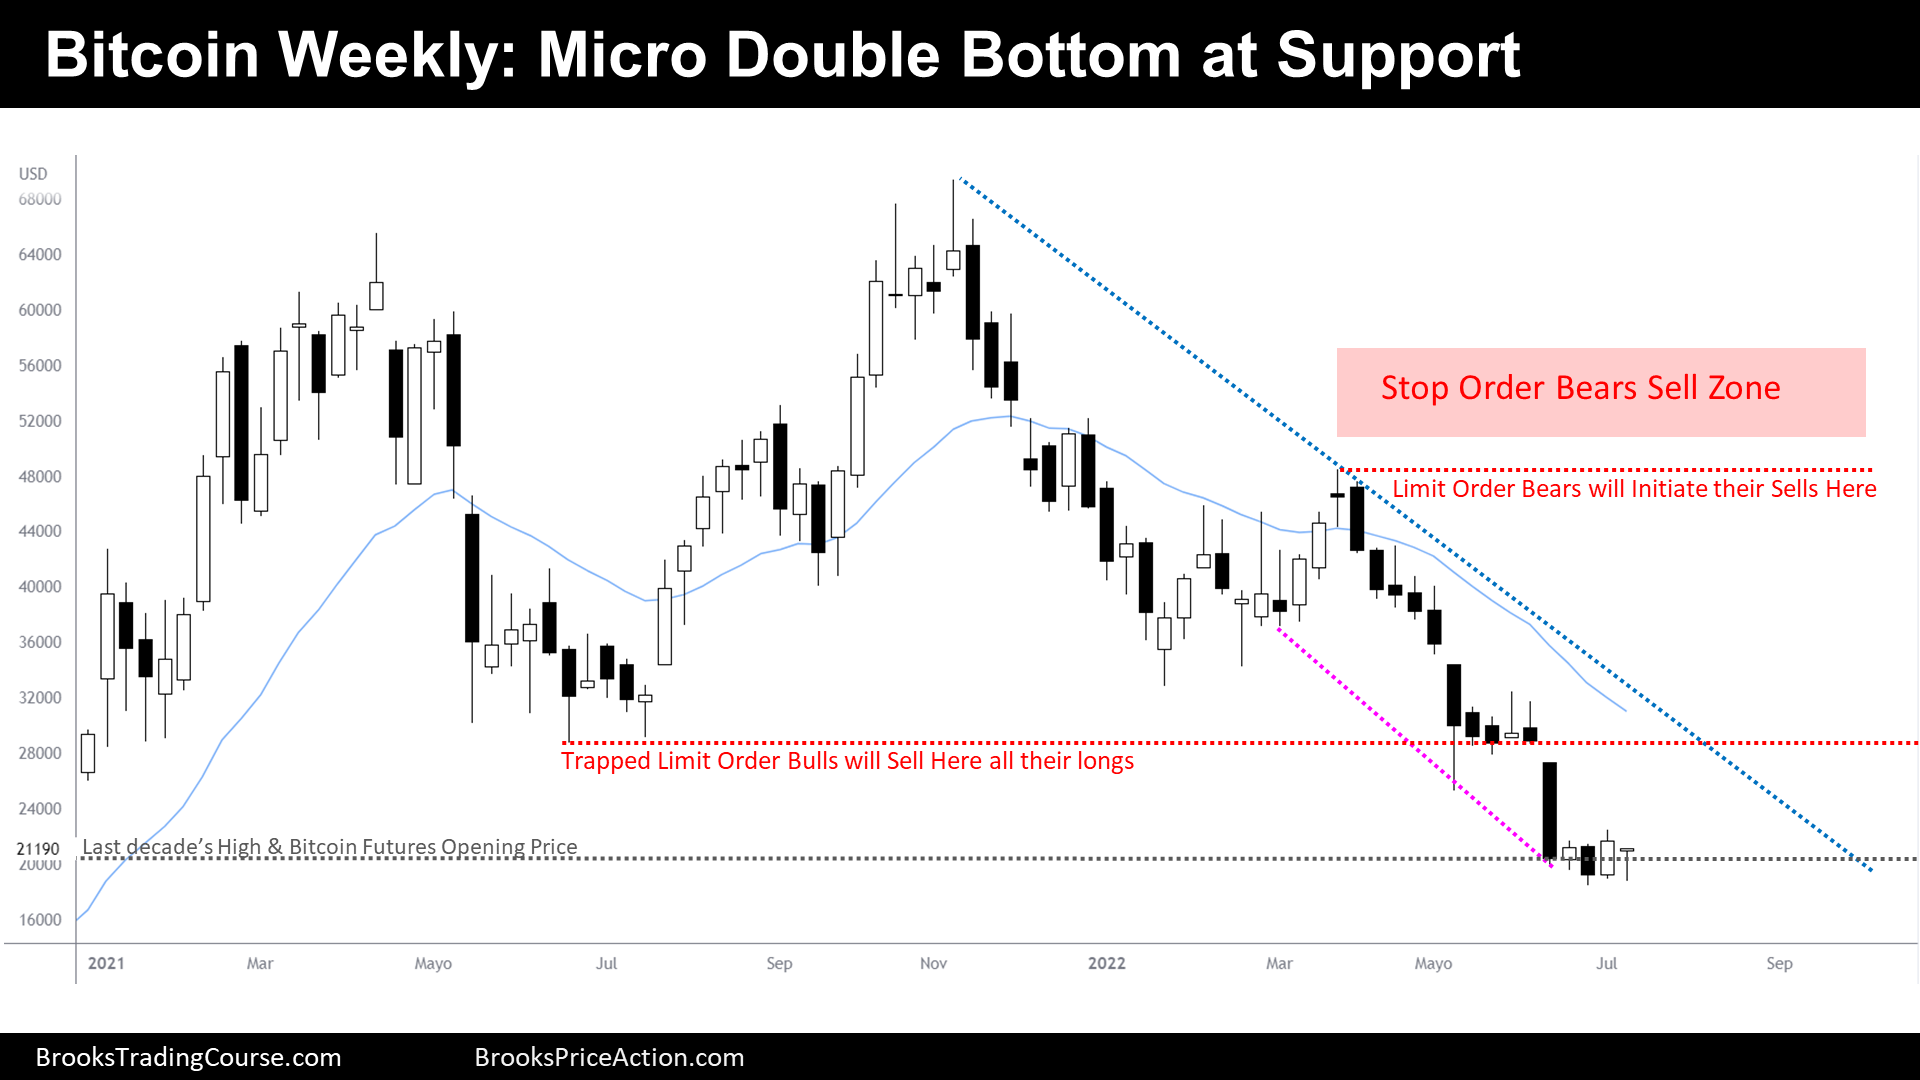 Bitcoin Micro Double Bottom at Support on Weekly Chart